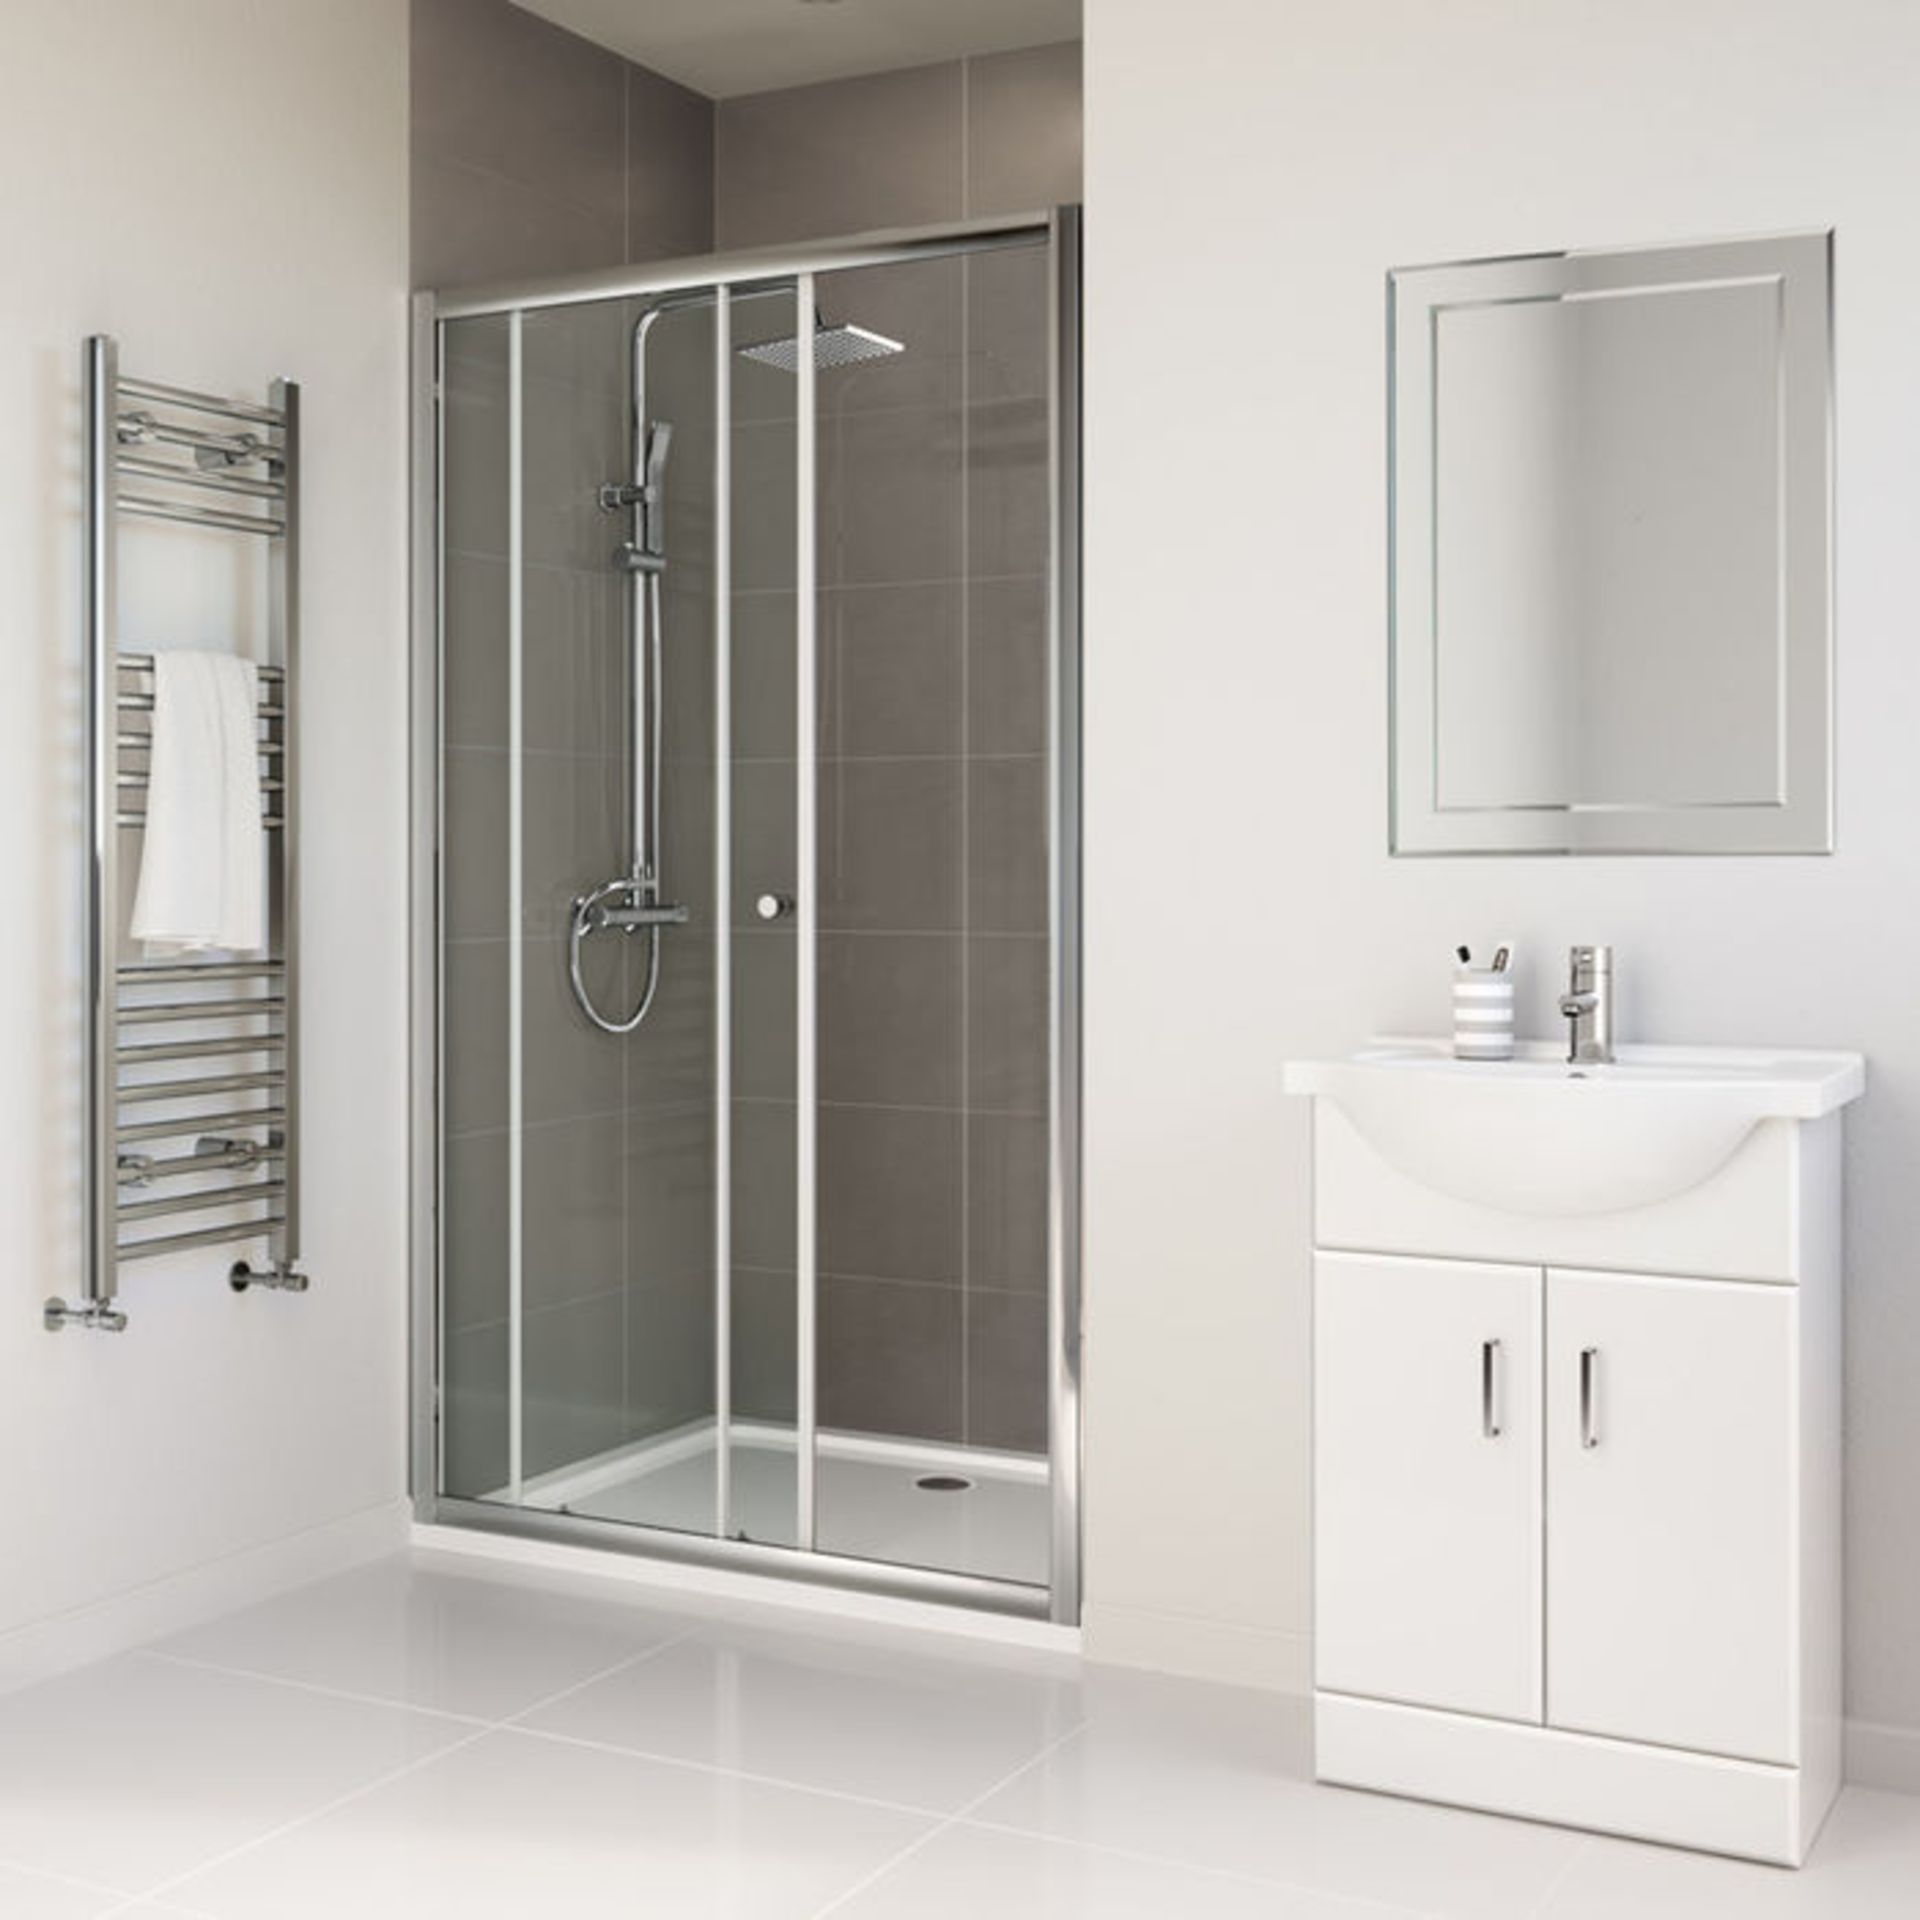 (W98) 1200mm - Elements Sliding Shower Door. RRP £299.99. 4mm Safety Glass Fully waterproof tested - Image 3 of 3